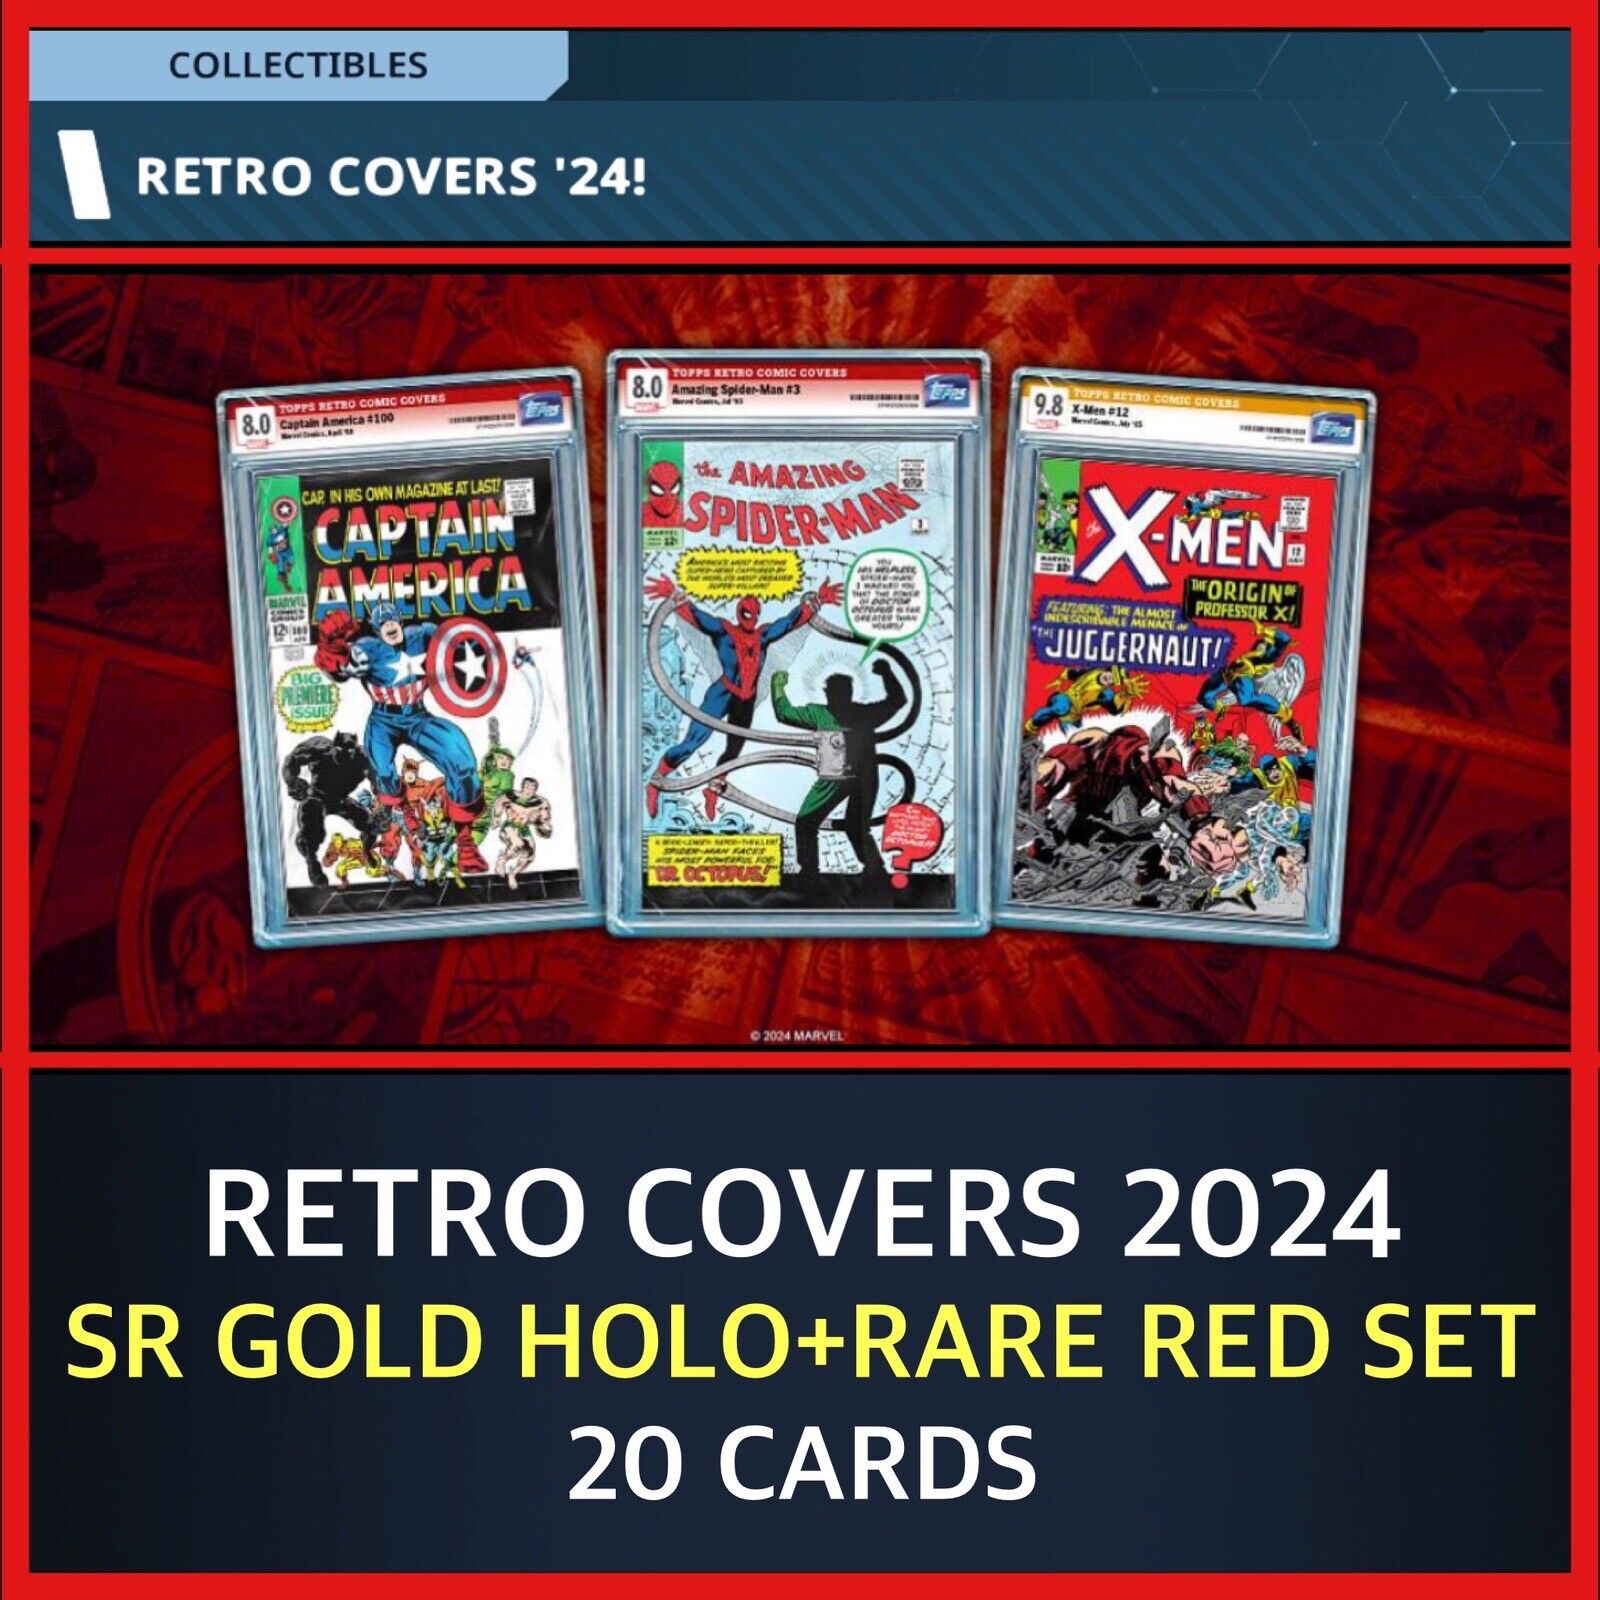 RETRO COVERS 2024-SR GOLD HOLO+RARE RED 20 CARD SET-TOPPS MARVEL COLLECT DIGITAL